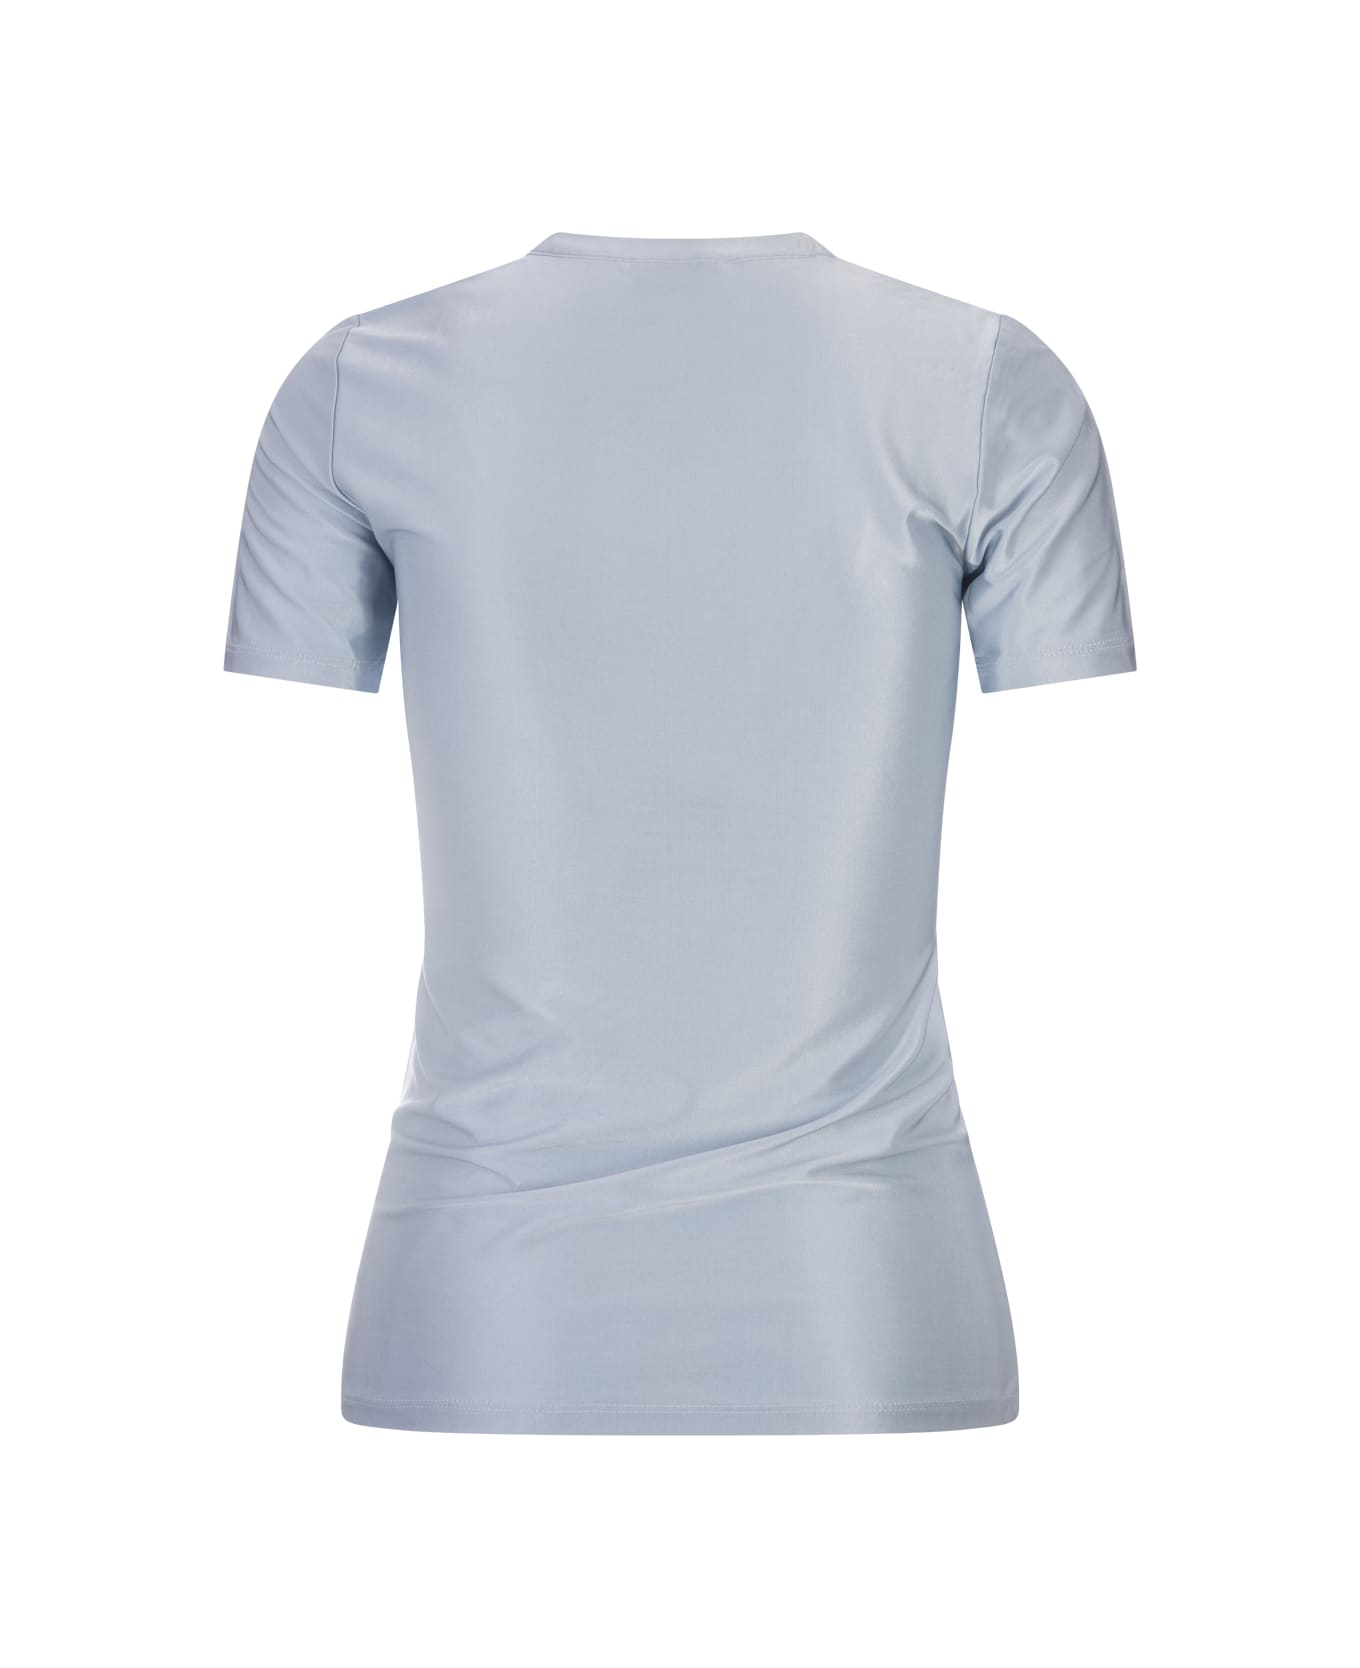 Paco Rabanne Faded Blue Draped Top - Blue